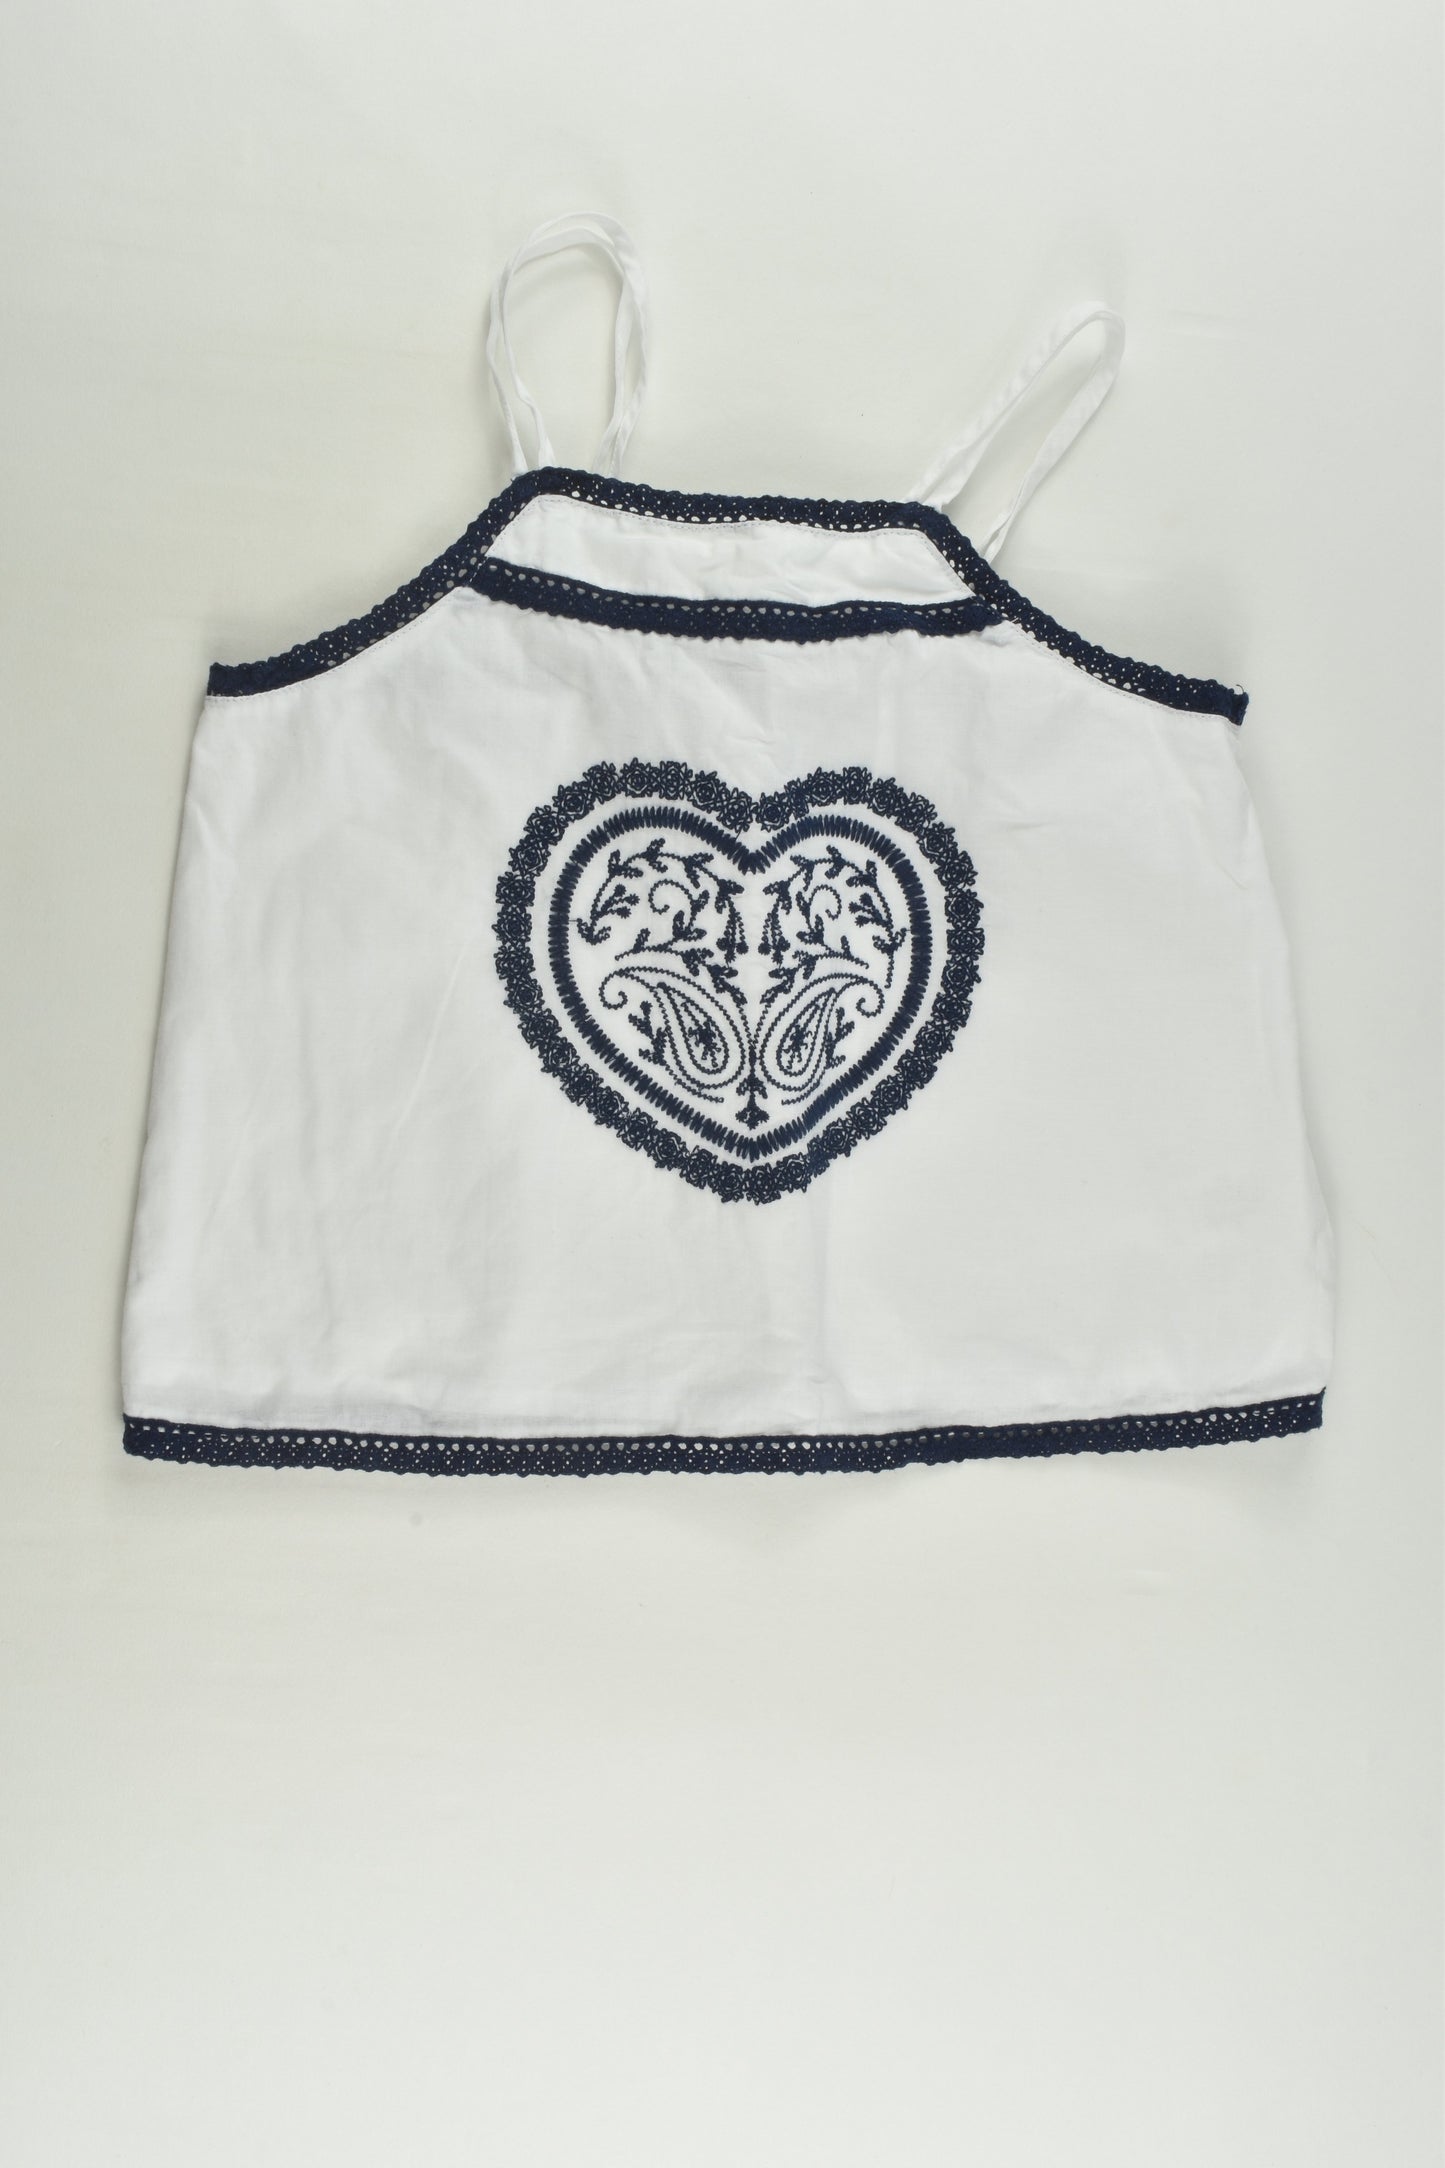 Witchery Girl Size 7 Lined Top with Love Heart Embroidery